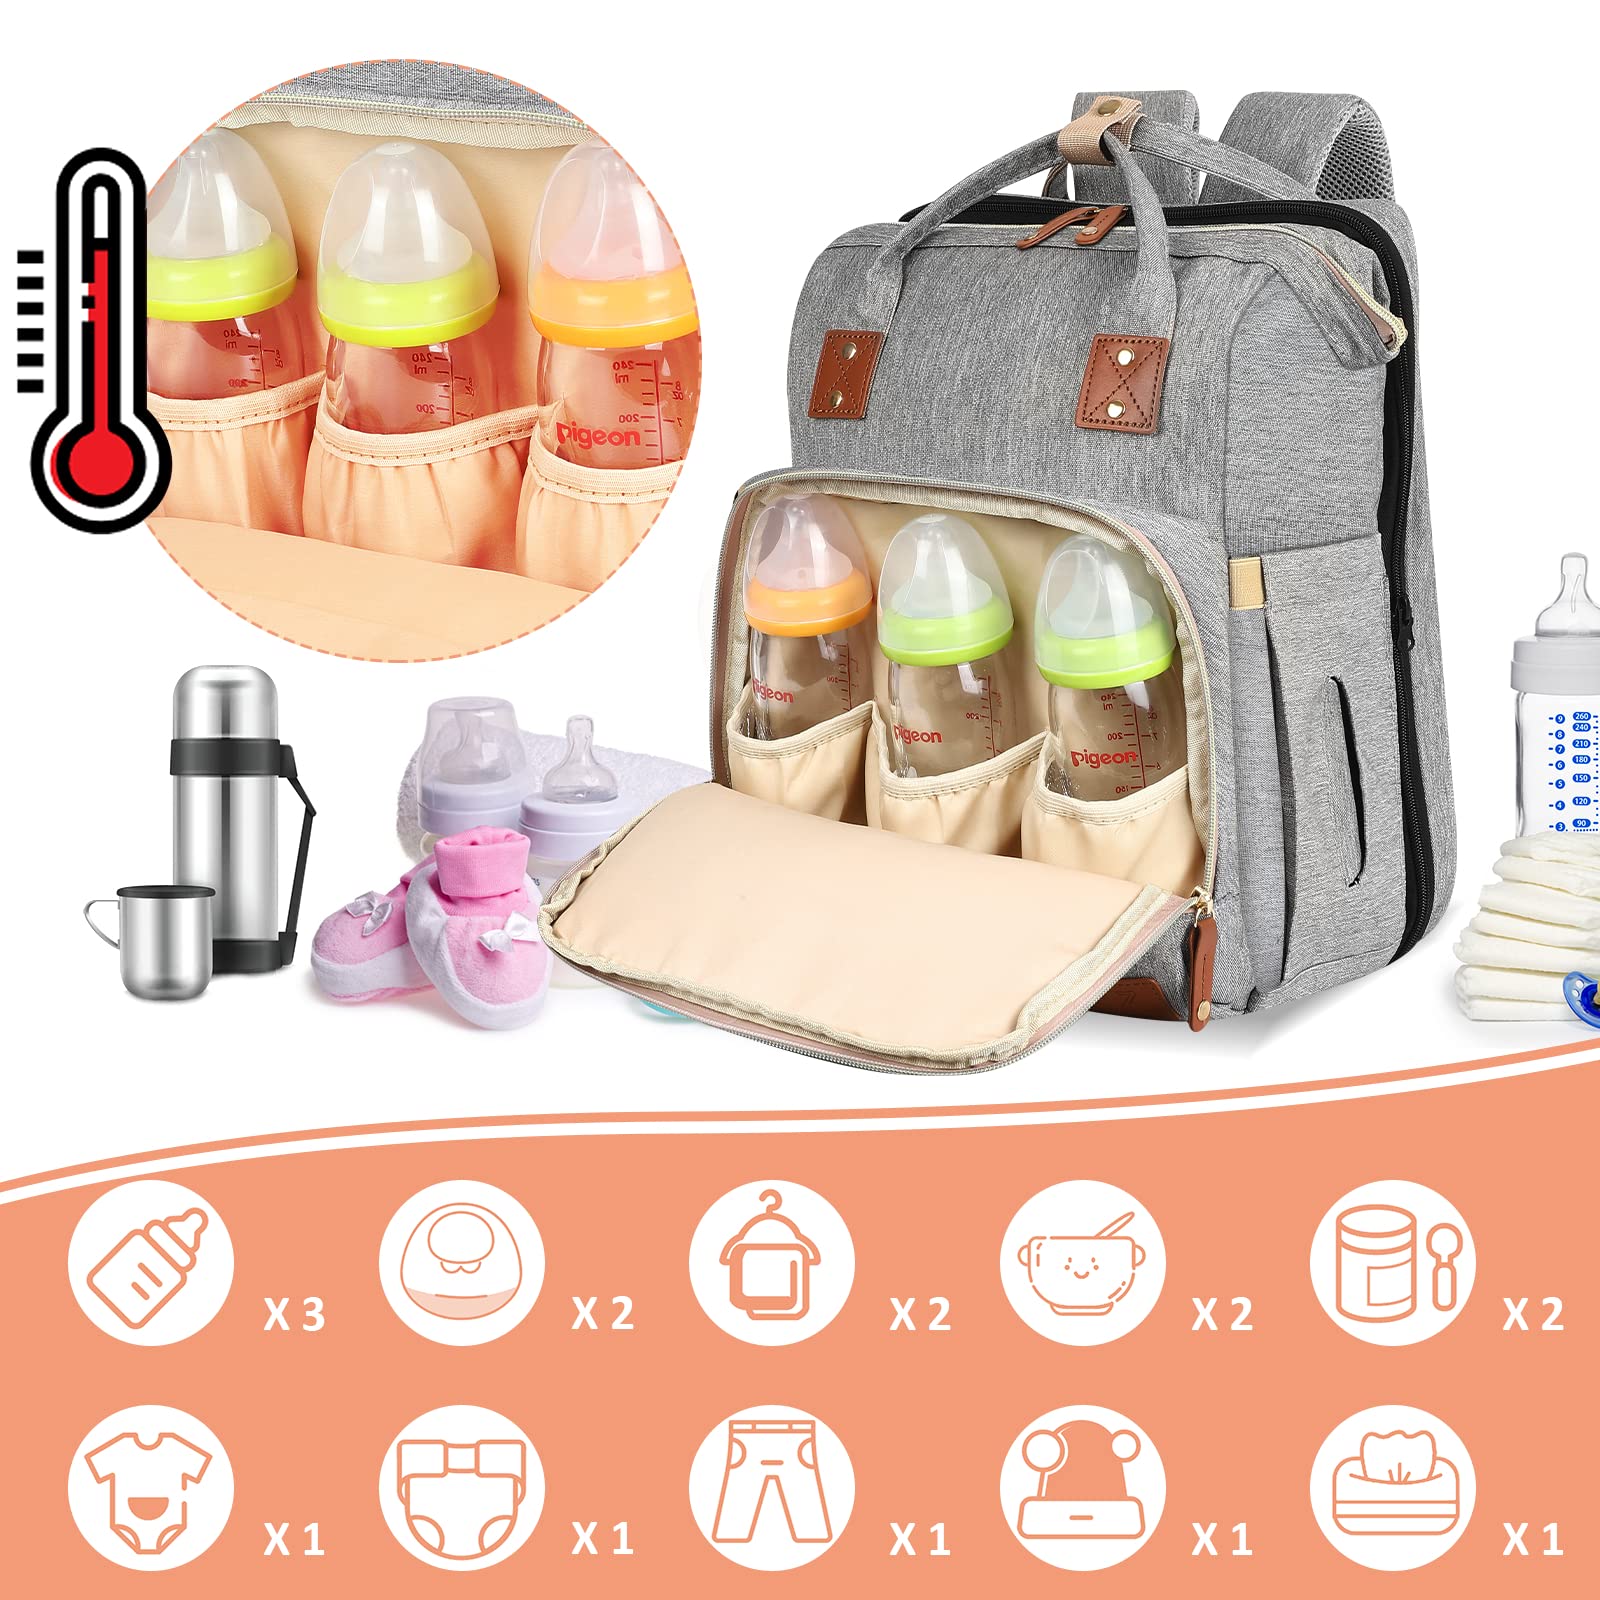 HKZ Diaper Bag Backpack 5 in 1 Baby Diaper Bags for Girls and Boys,Travel Foldable Baby Large with USB Charging Port (Gray)